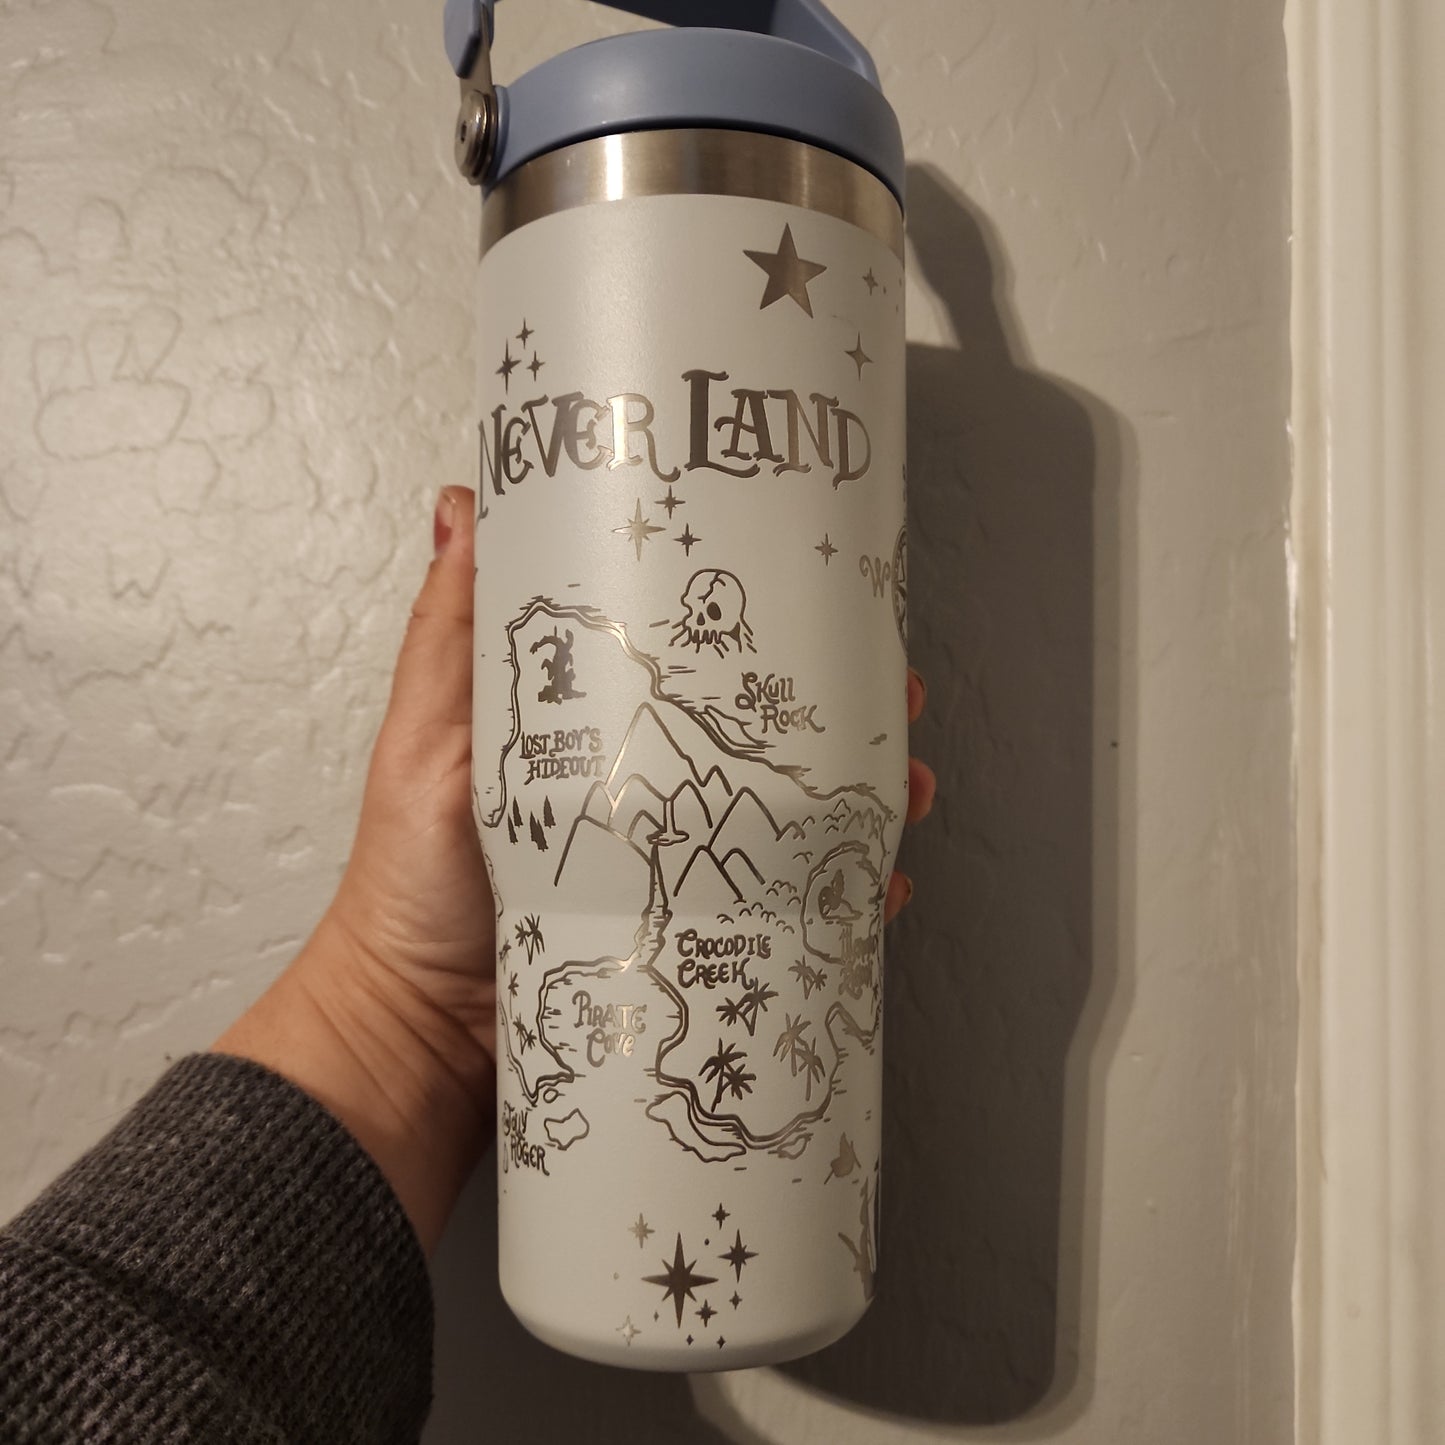 30 Oz Ice flow Stanley Engraved Neverland